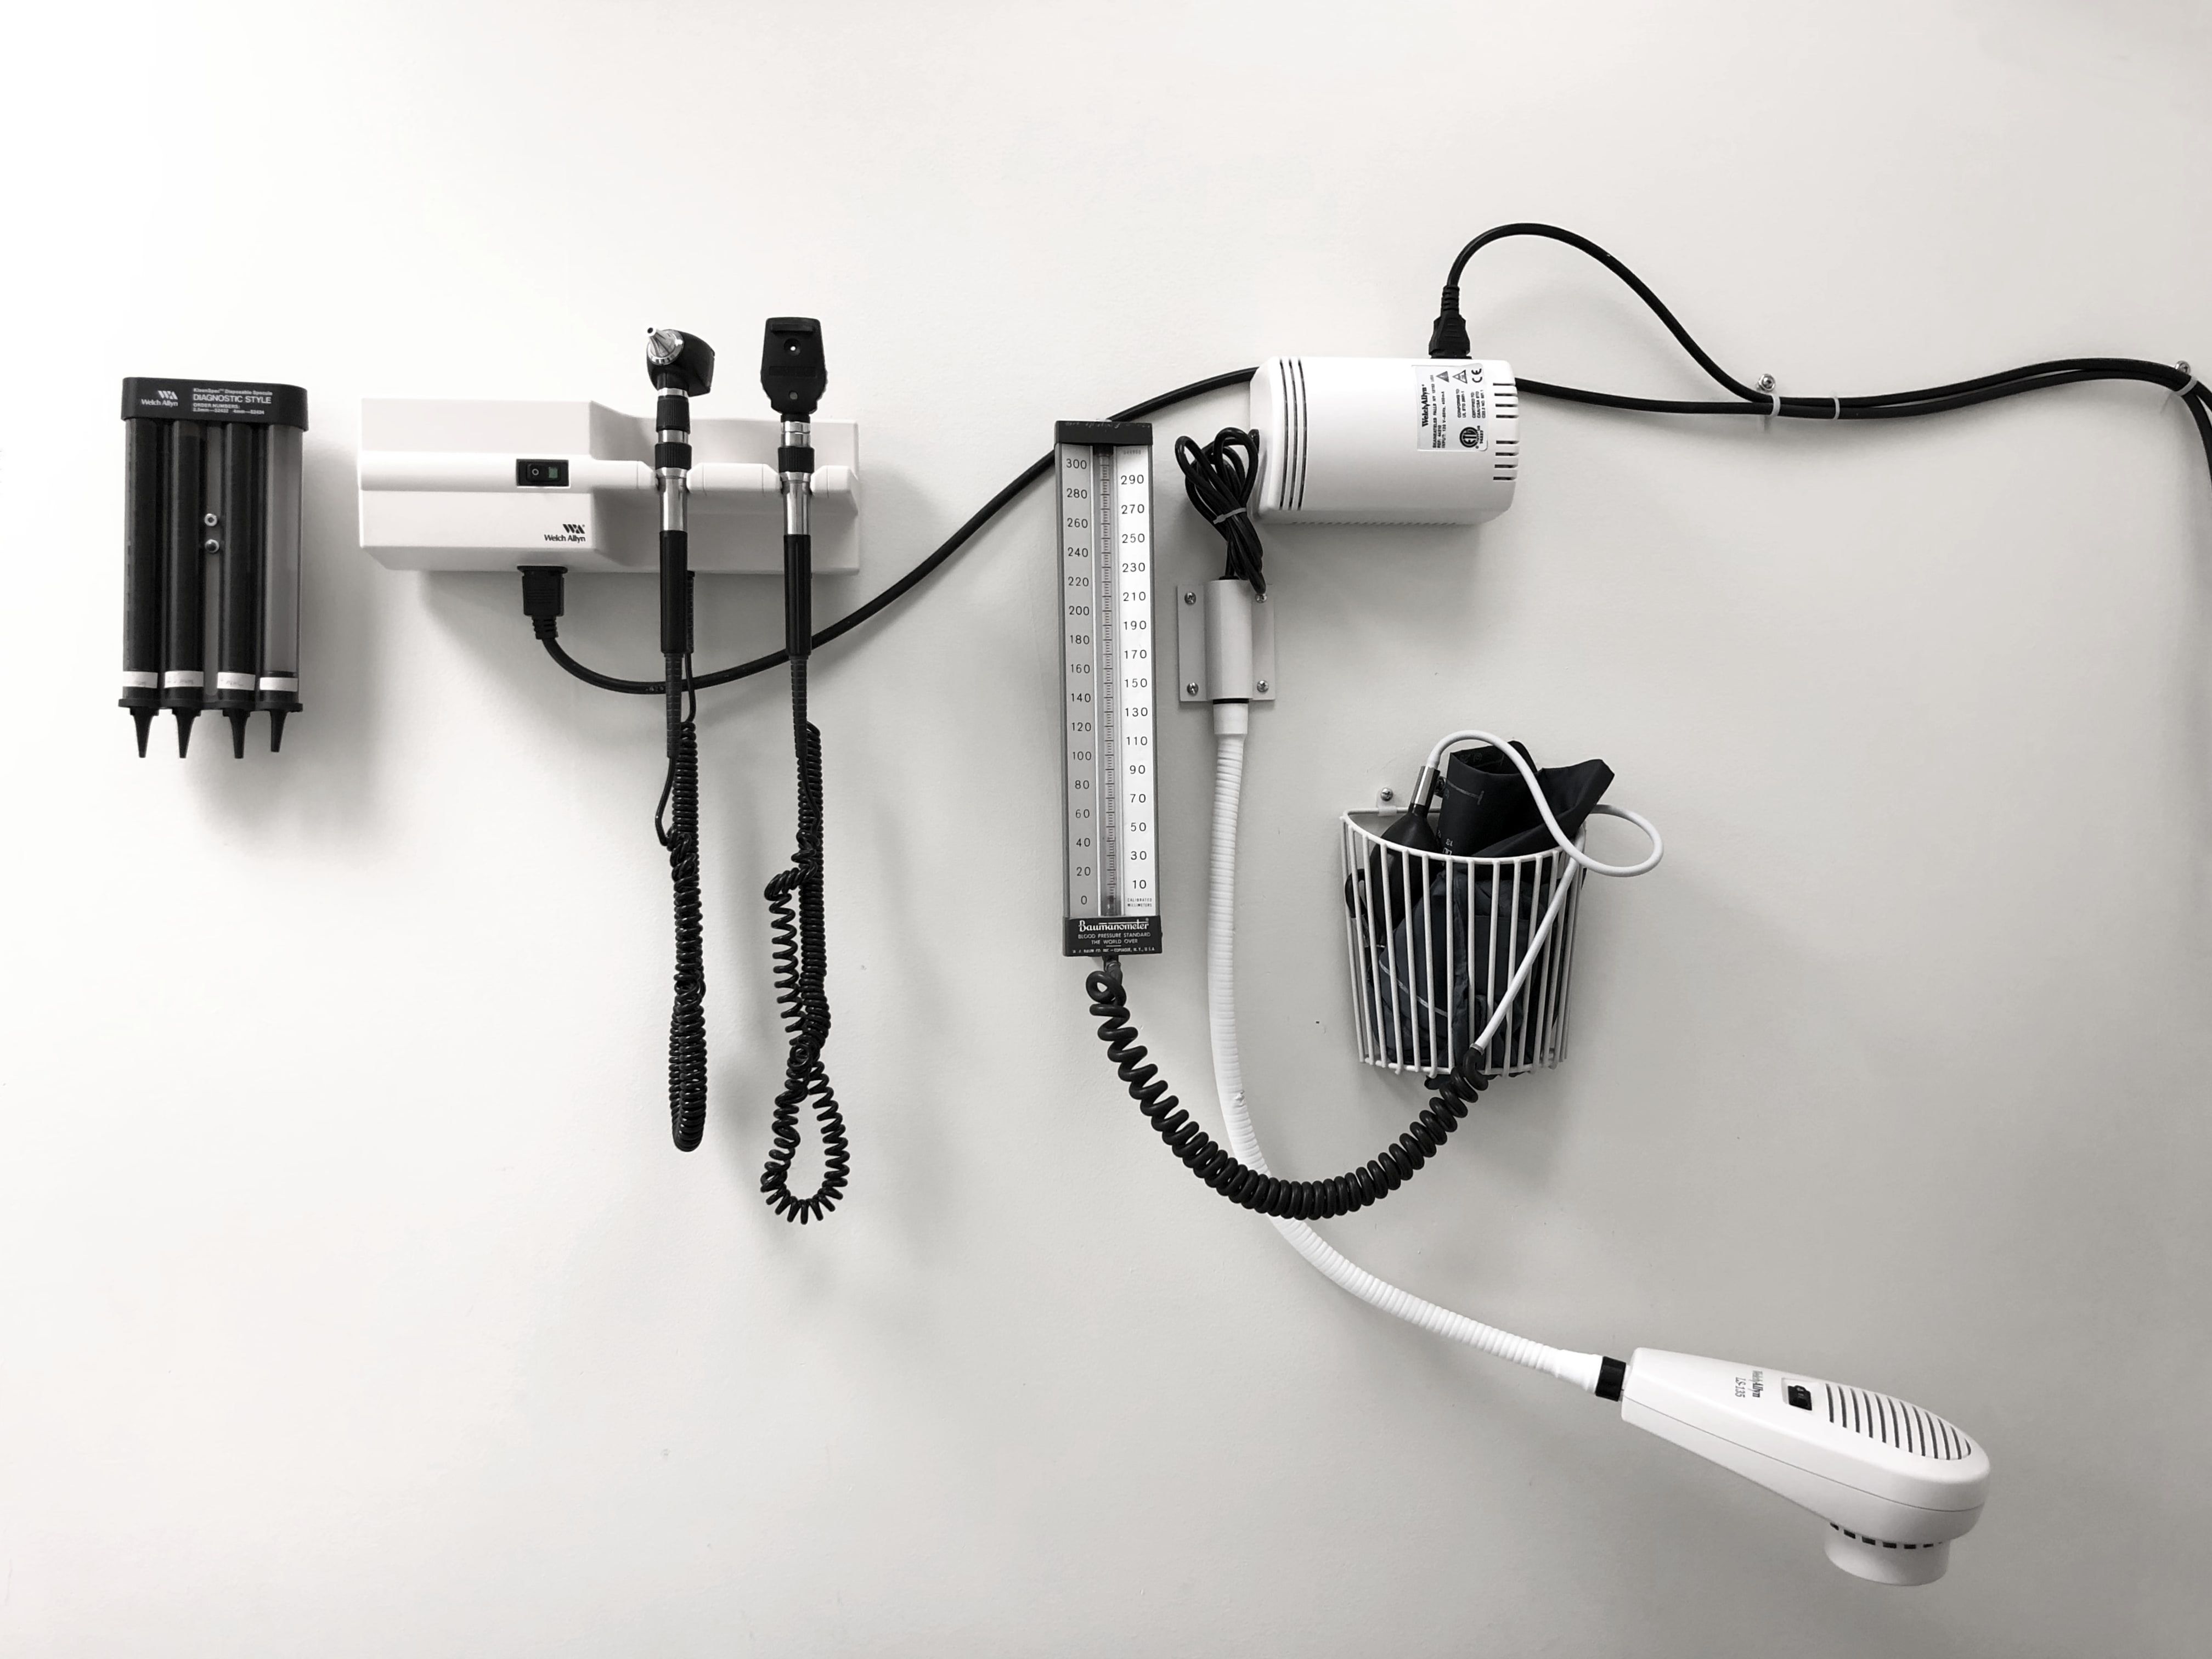 Medical equipment is mounted to the doctor's office wall